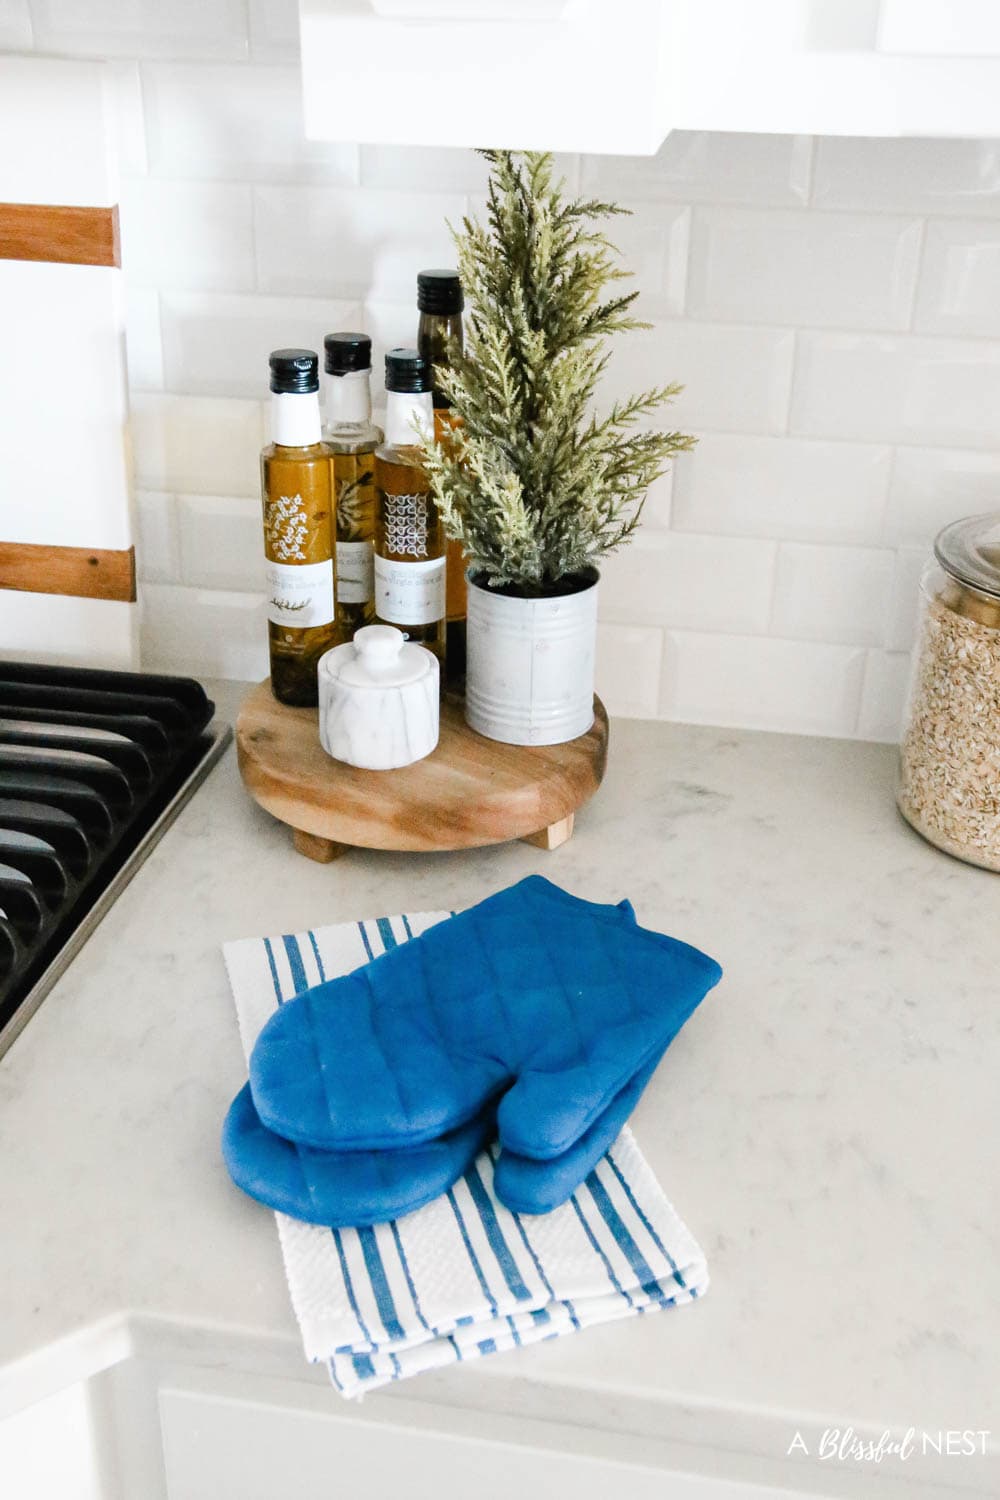 Navy blue pot holders sitting on blue and white striped dish towels on a counter next to a cooking range. 